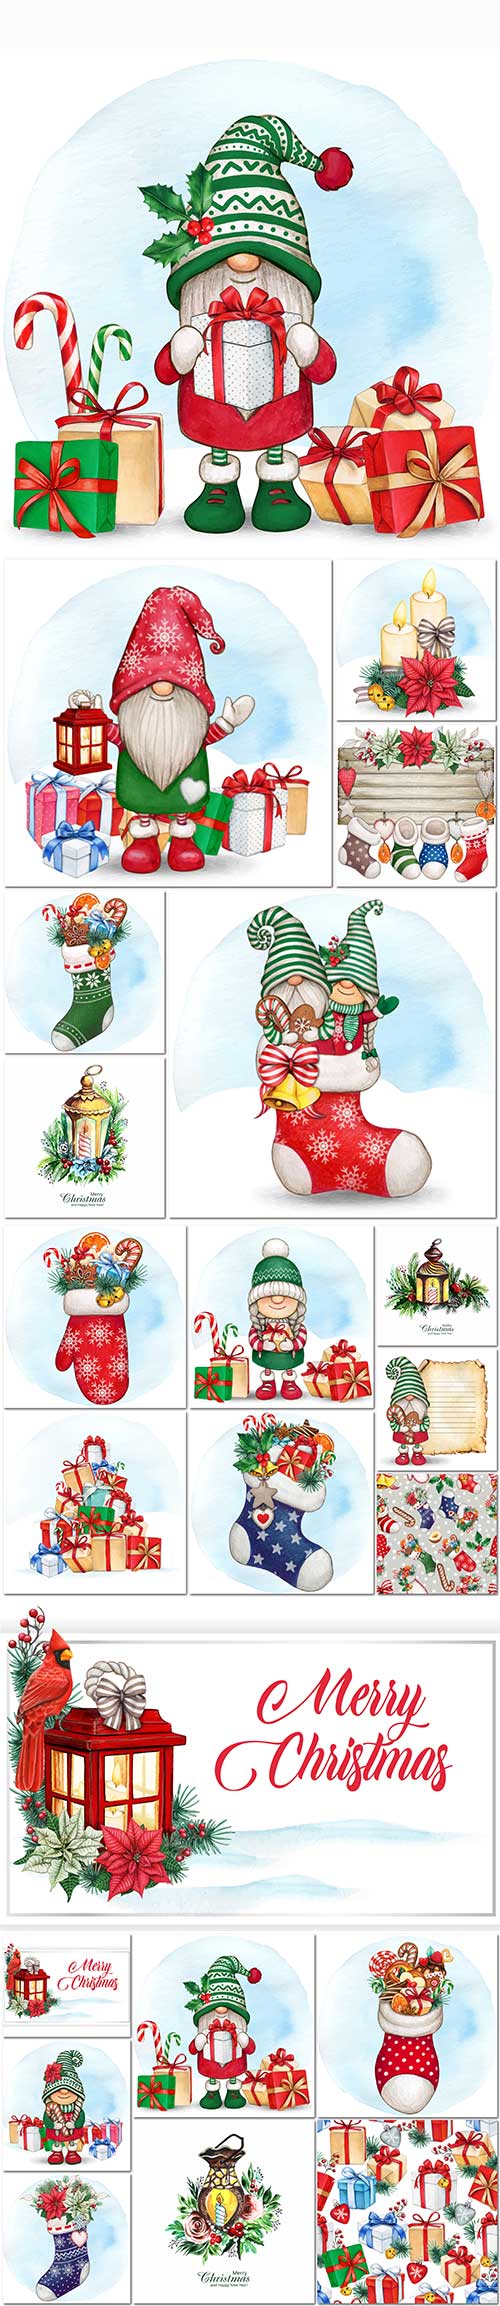 Watercolor hand drawn santa with holiday decorations and elements in vector